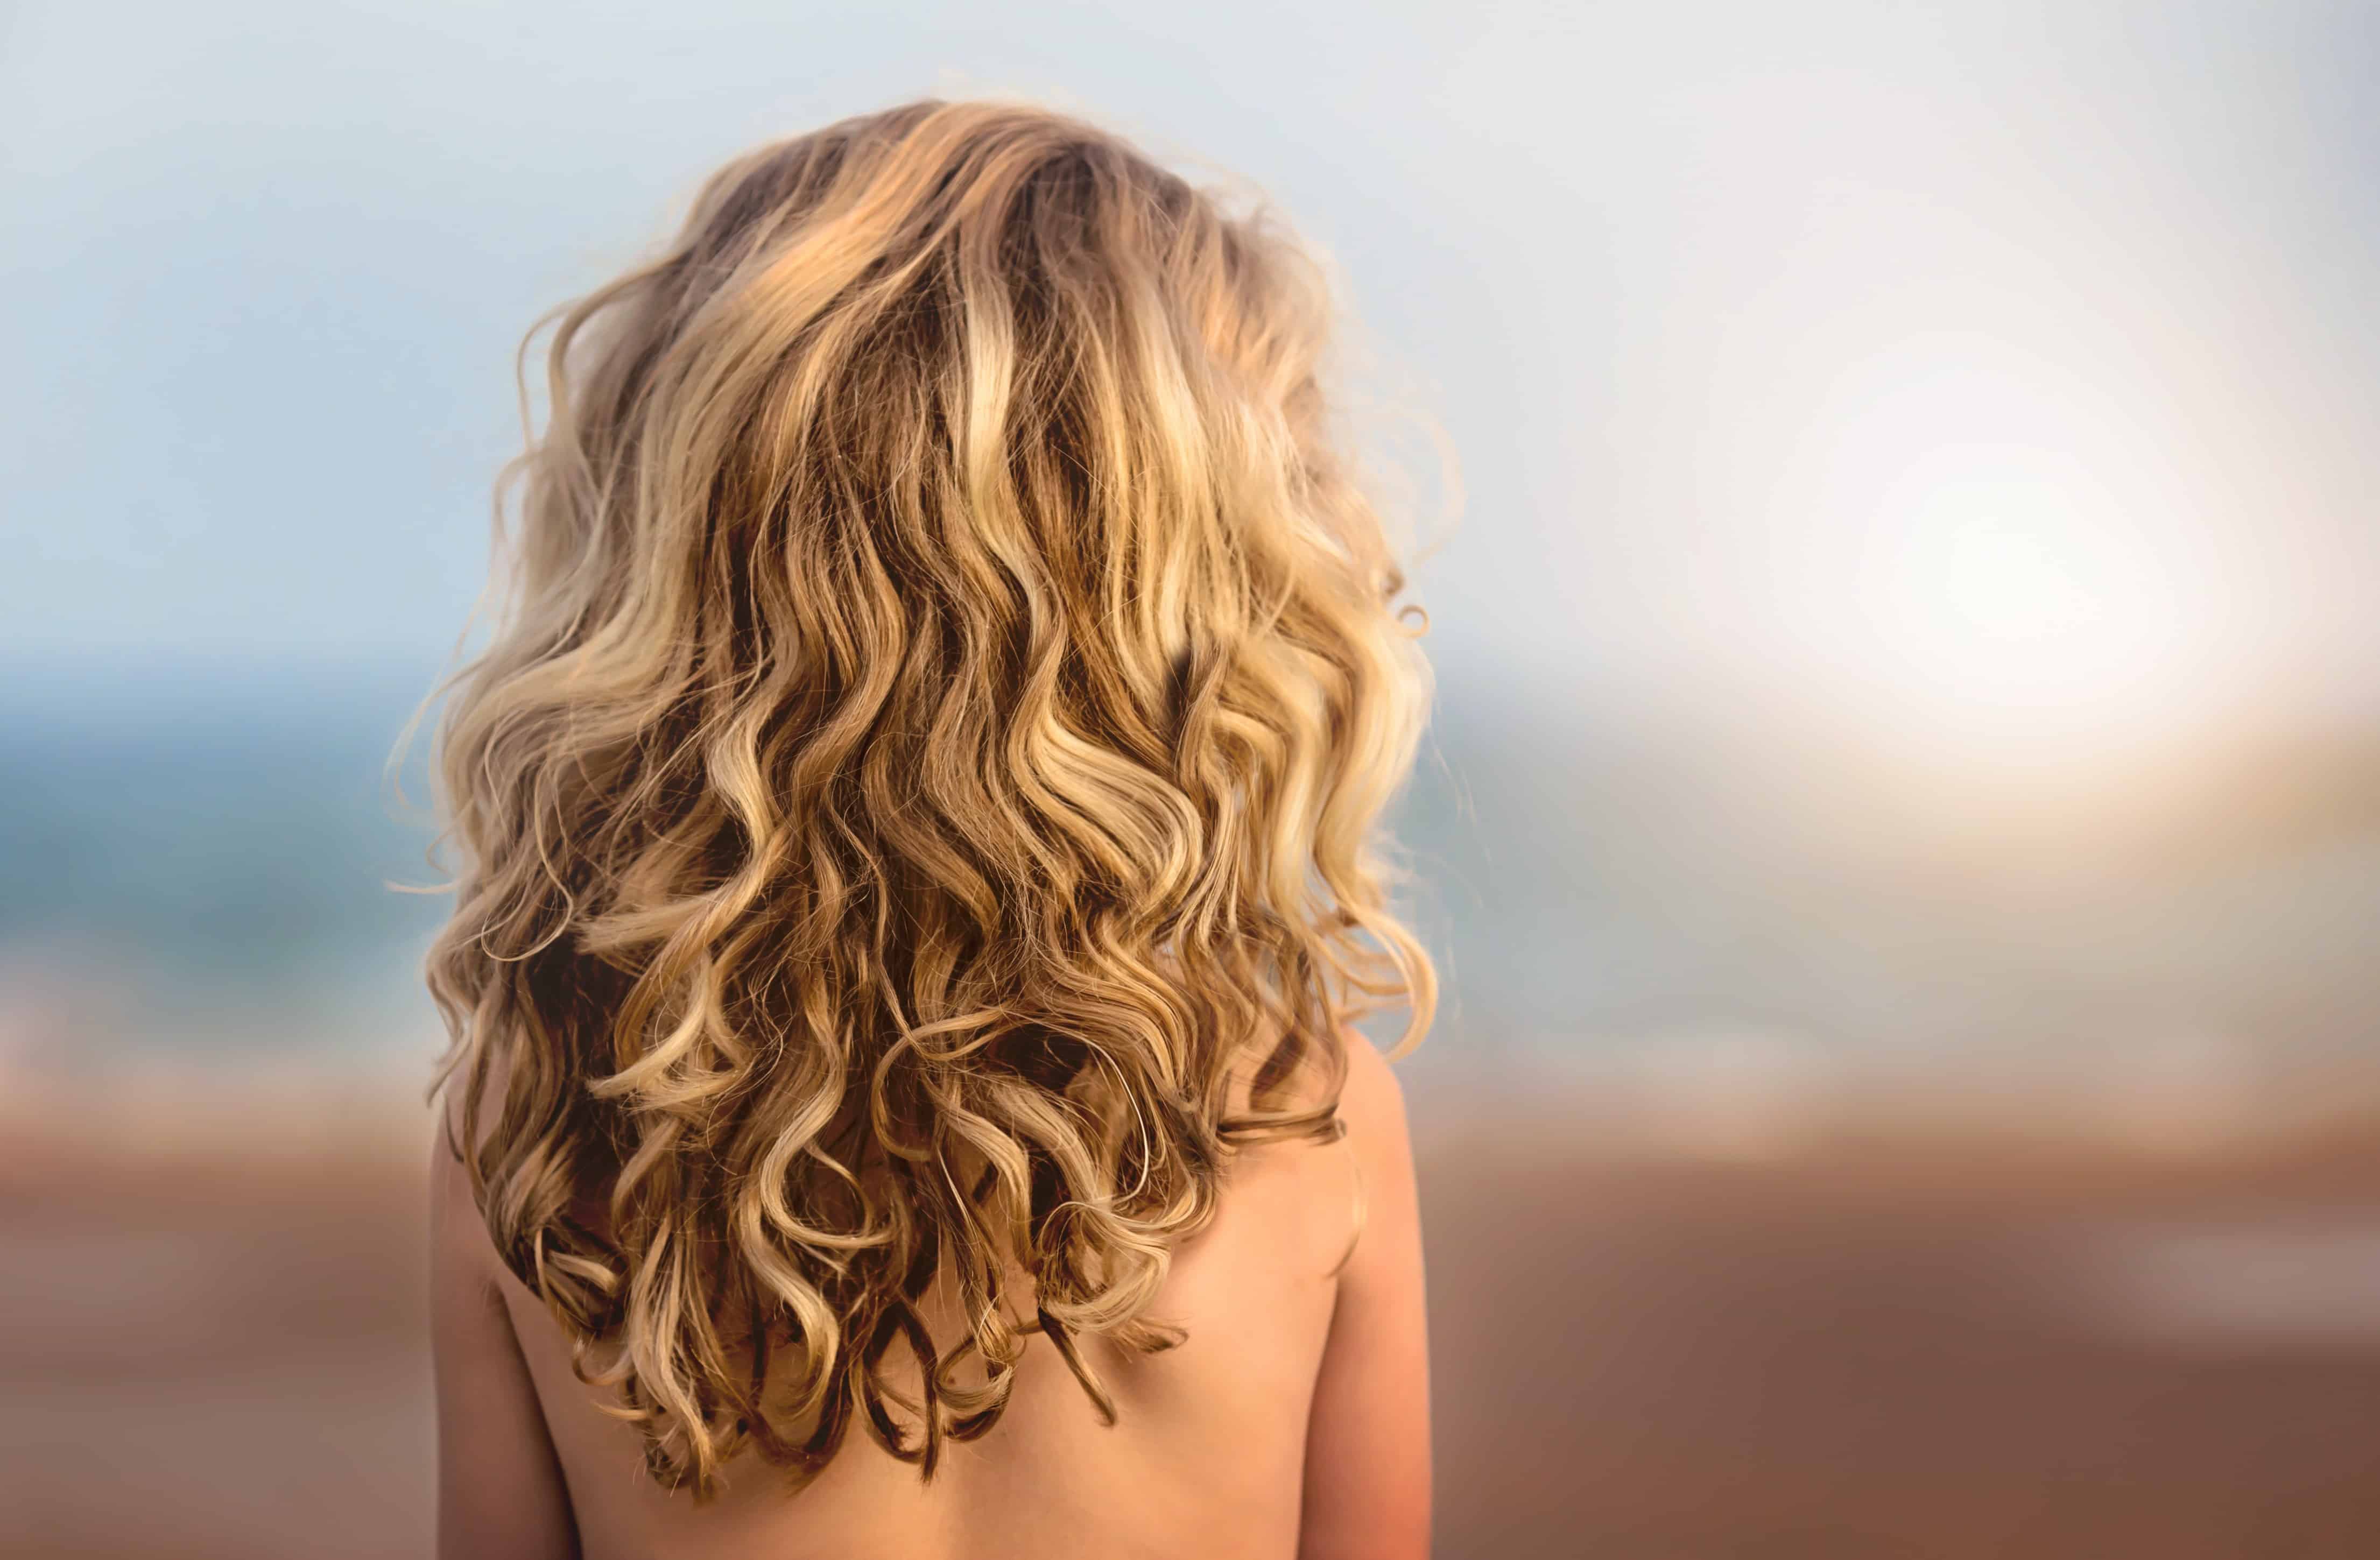 Blonde hair is often associated with youth and beauty - wide 9